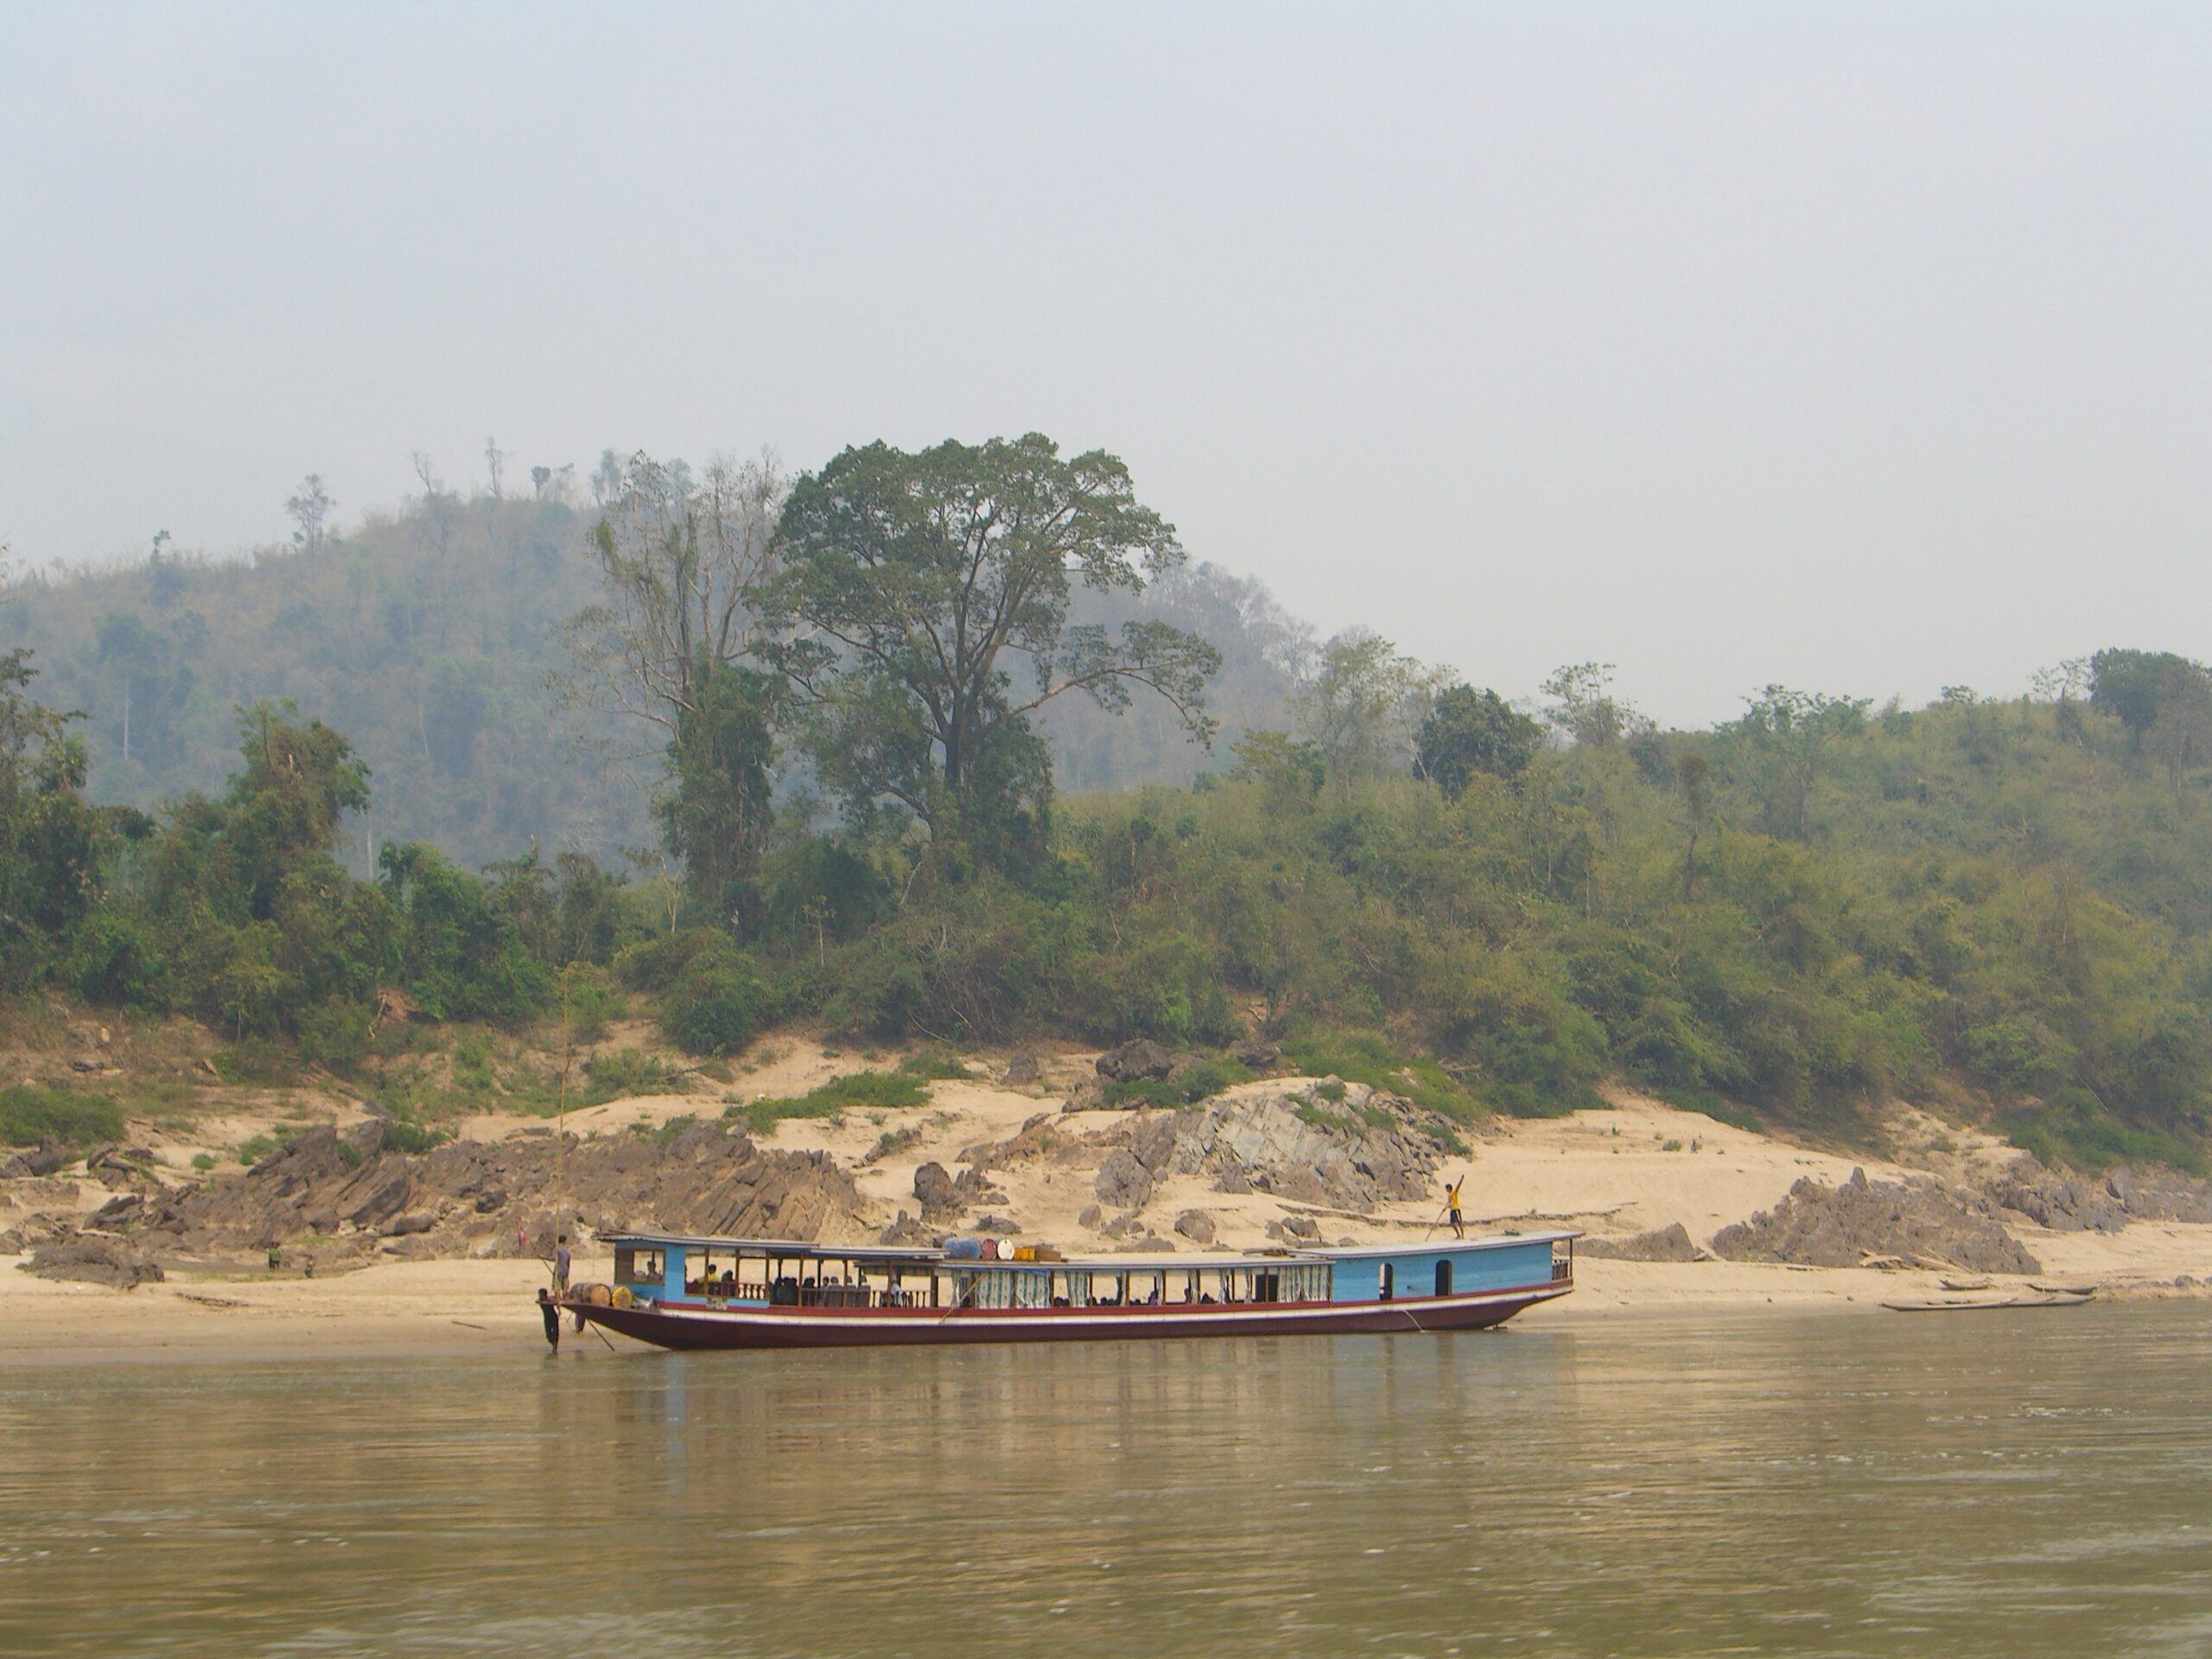 One of the infamous slow boats makes its way down the Mekong